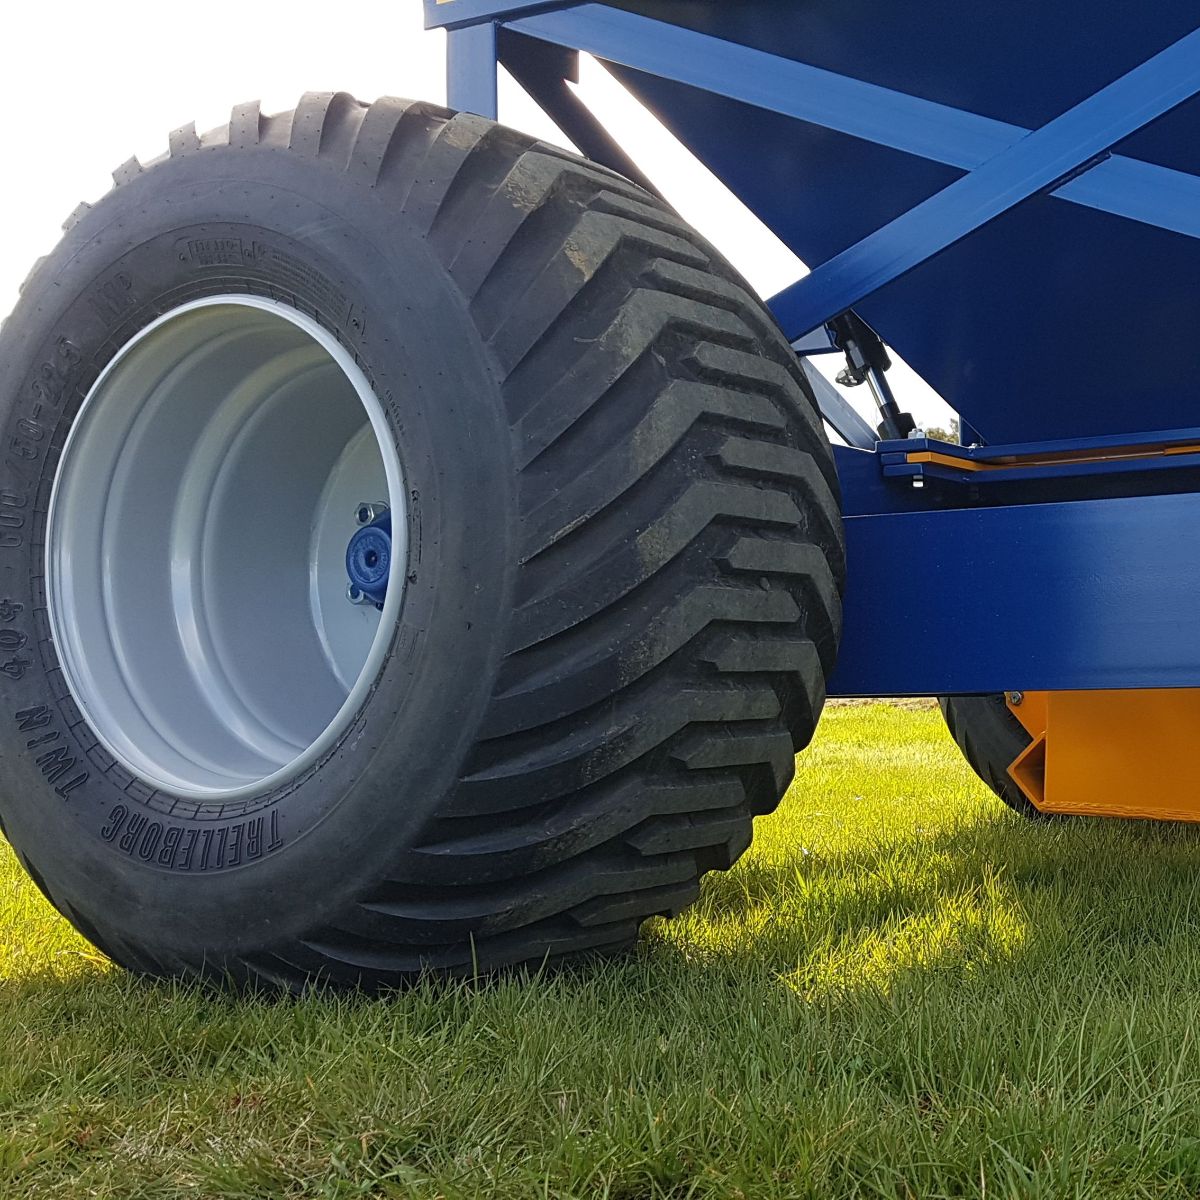 Delmade Rut Filler for filling irrigation ruts.  All units feature large floatation tyres - get on better in wet conditions.